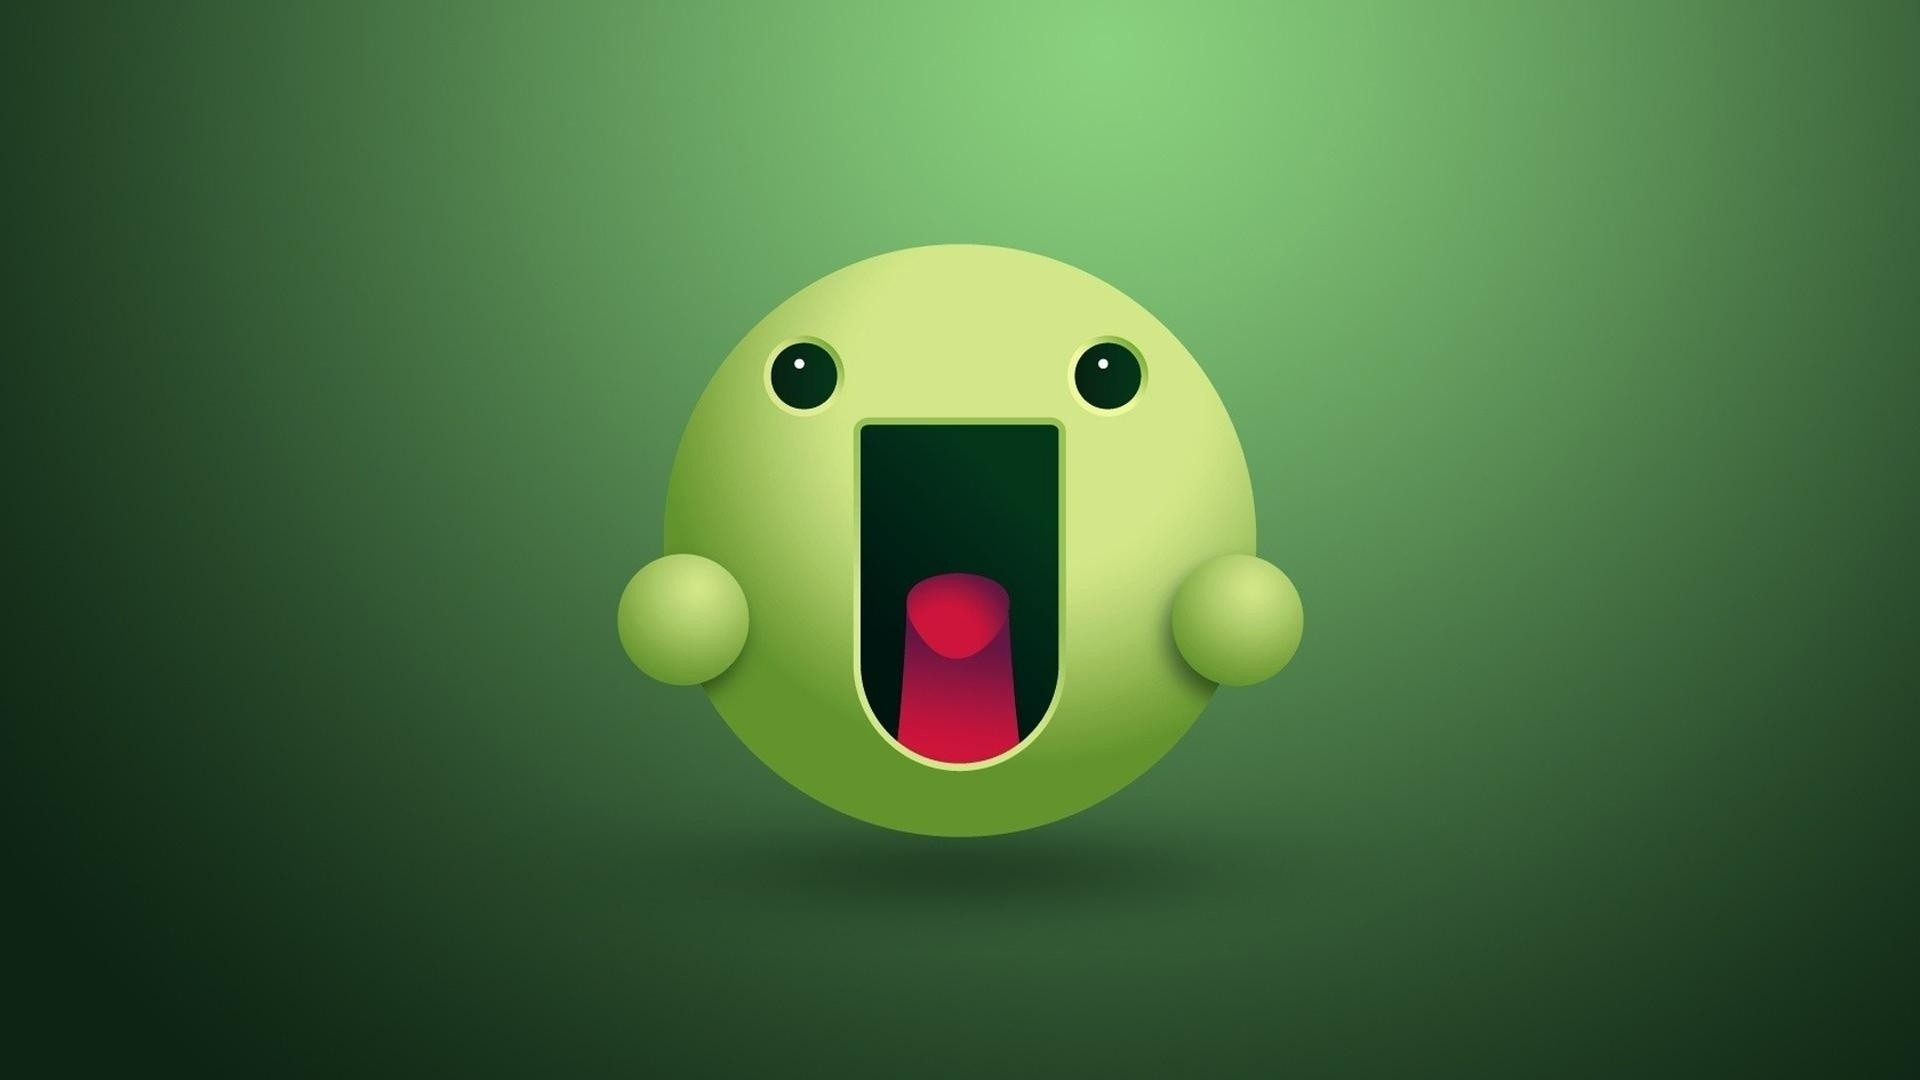 1920x1080 Smiley Wallpaper for android Best Of Green Smiley Face Desktop Pc and Mac  Wallpaper